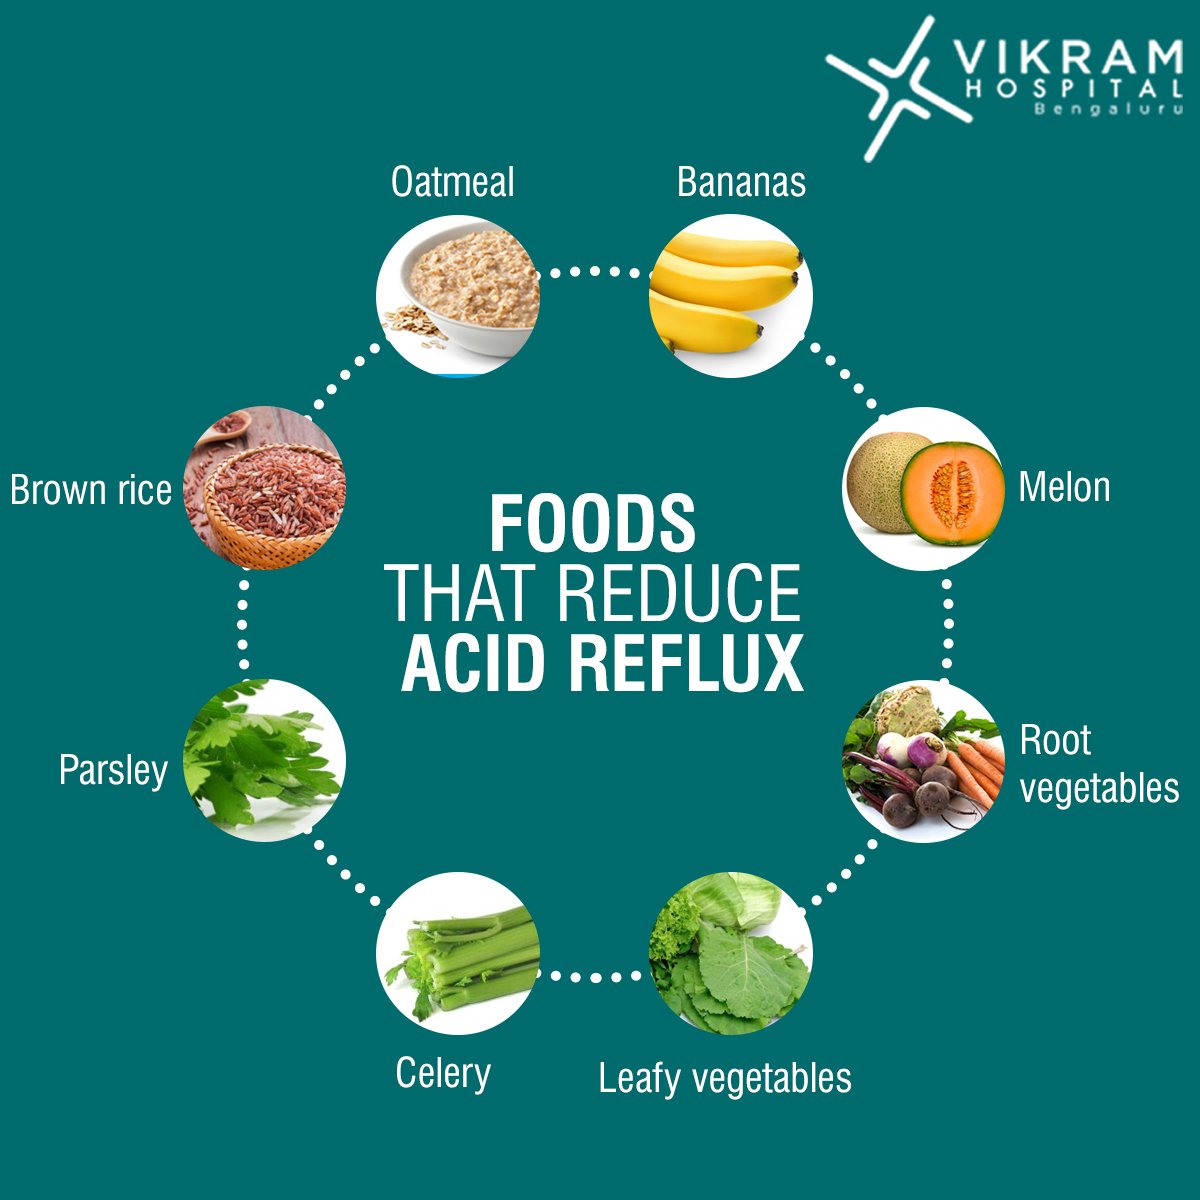 Foods that can help to reduce Acid reflux